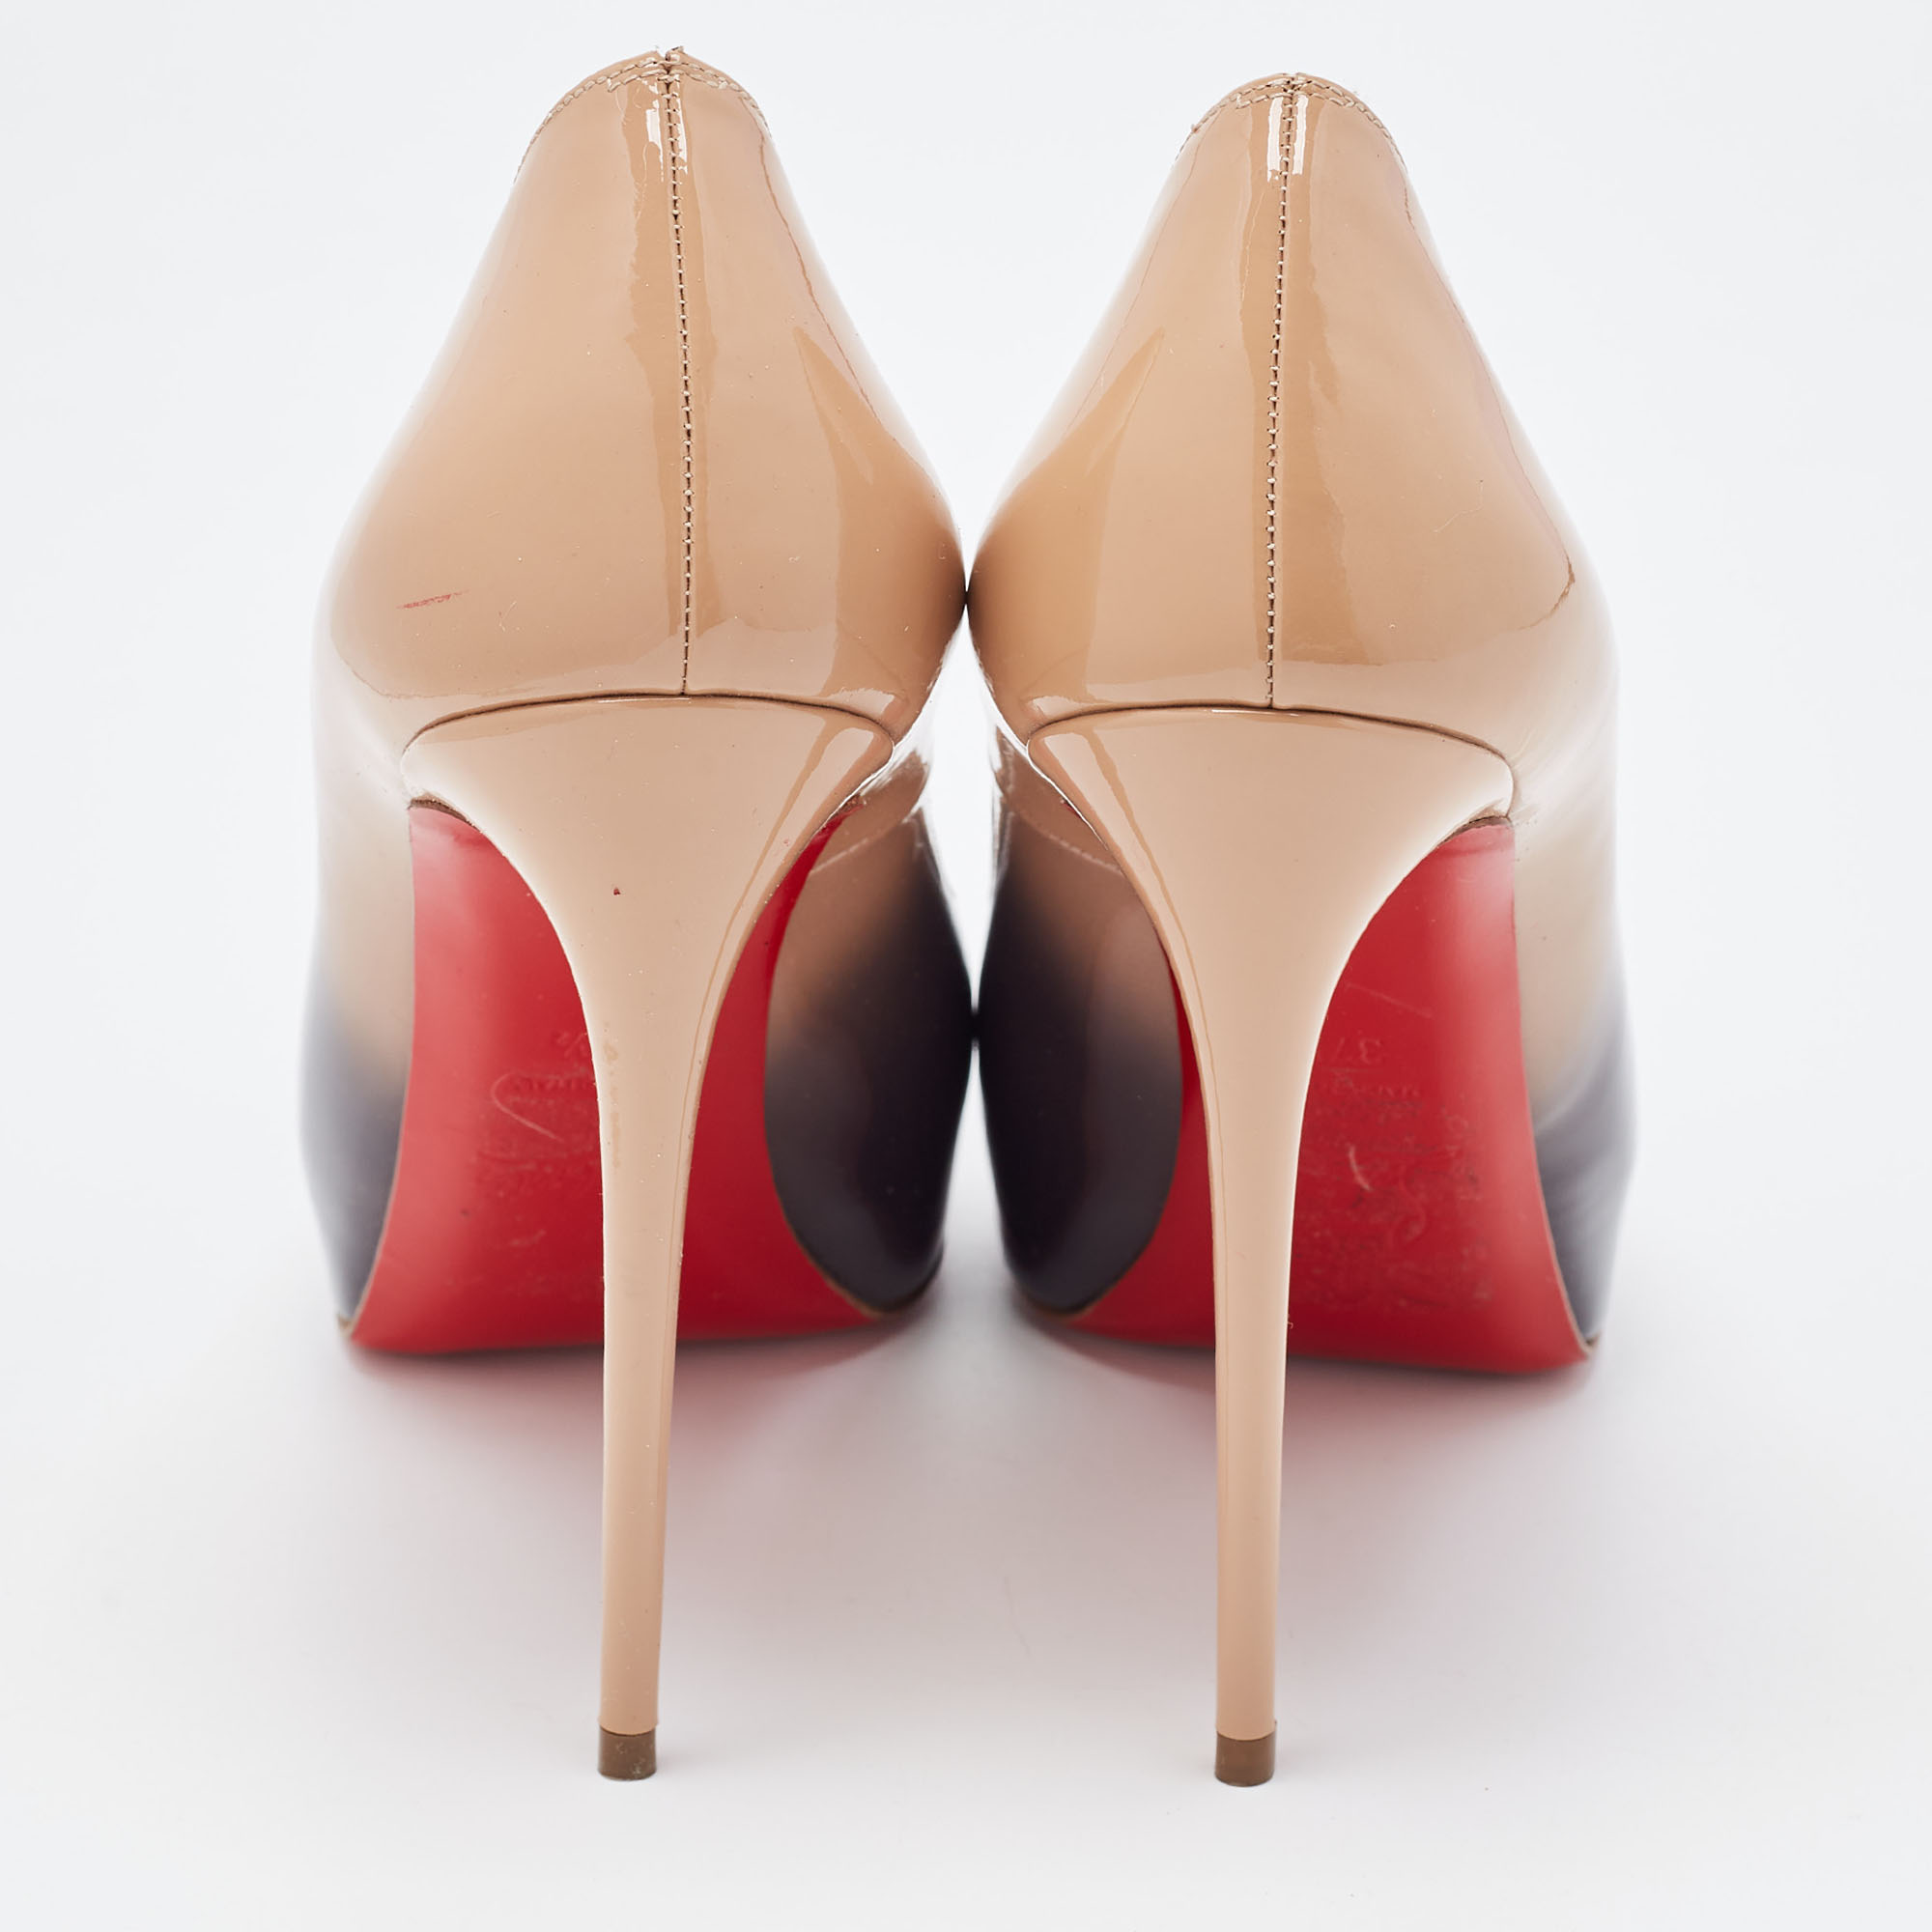 Christian Louboutin Two Tone Ombre Patent Leather New Very Prive Pumps Size 37.5